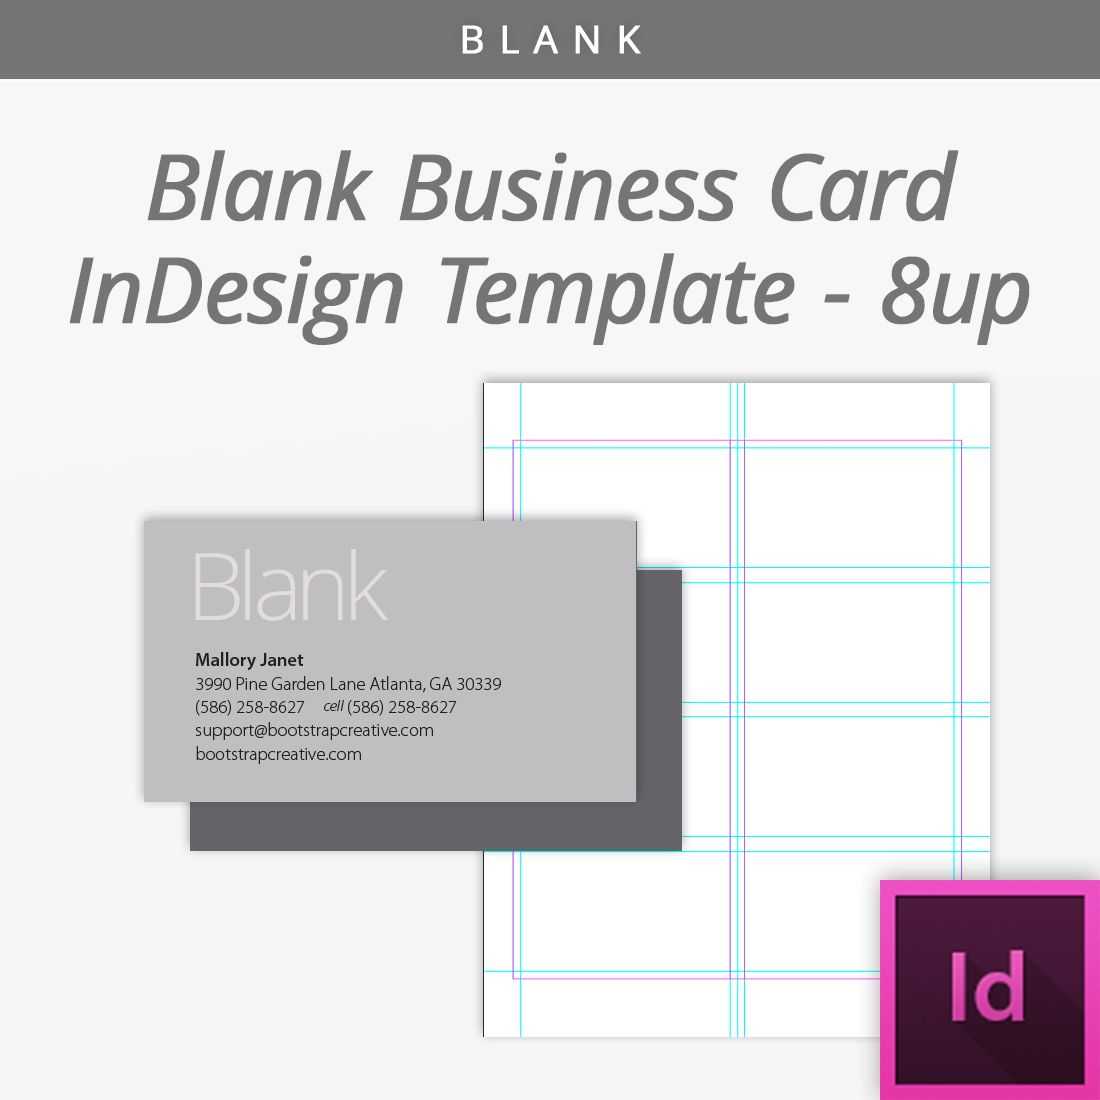 Bootstrap Creative | Blank Business Cards, Indesign With Blank Business Card Template Download